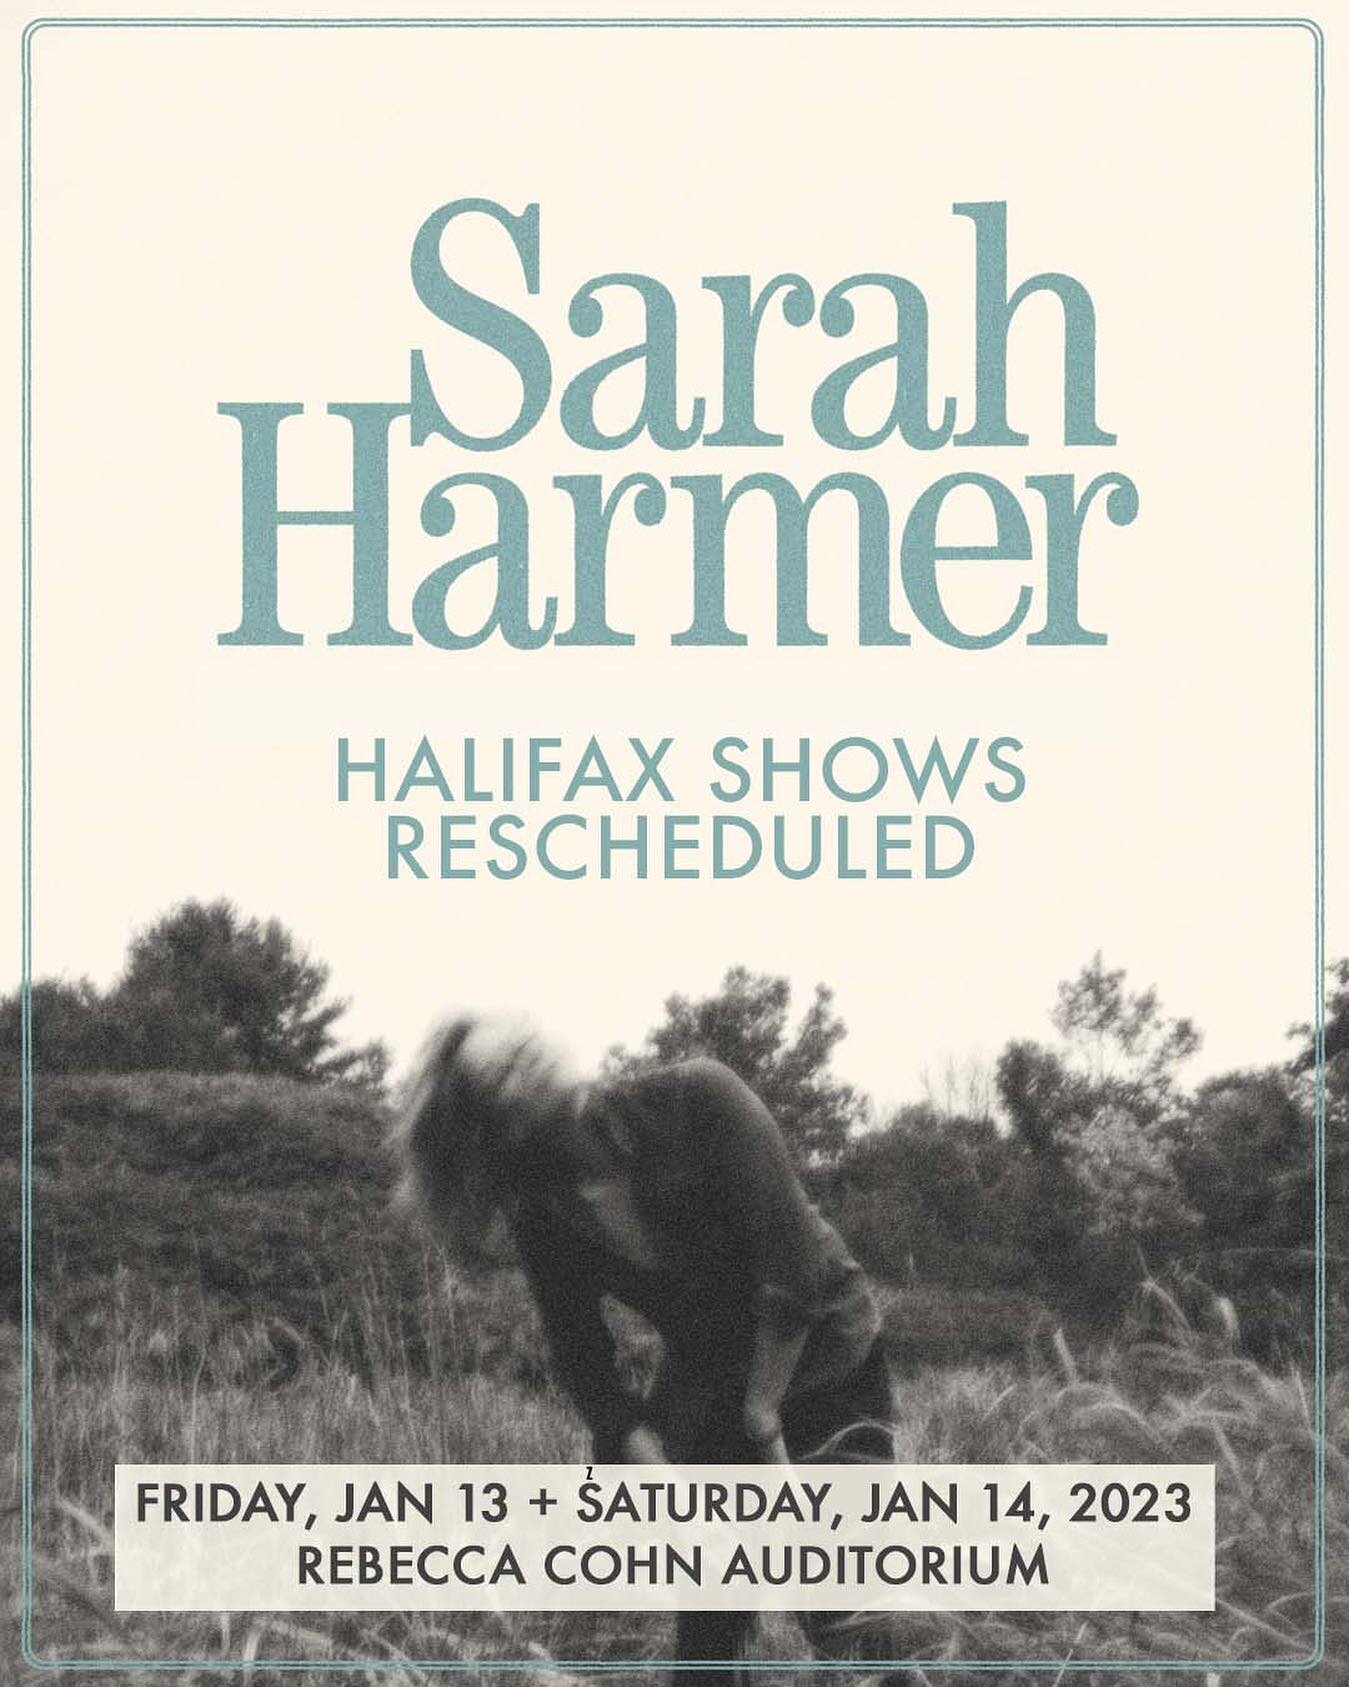 ICYMI: Sarah Harmer&rsquo;s Halifax shows have been rescheduled for January 13 &amp; 14, 2023. If you had tickets for the shows postponed last week due to the storm, hold on to them and they&rsquo;ll automatically be honoured on the new dates (no act